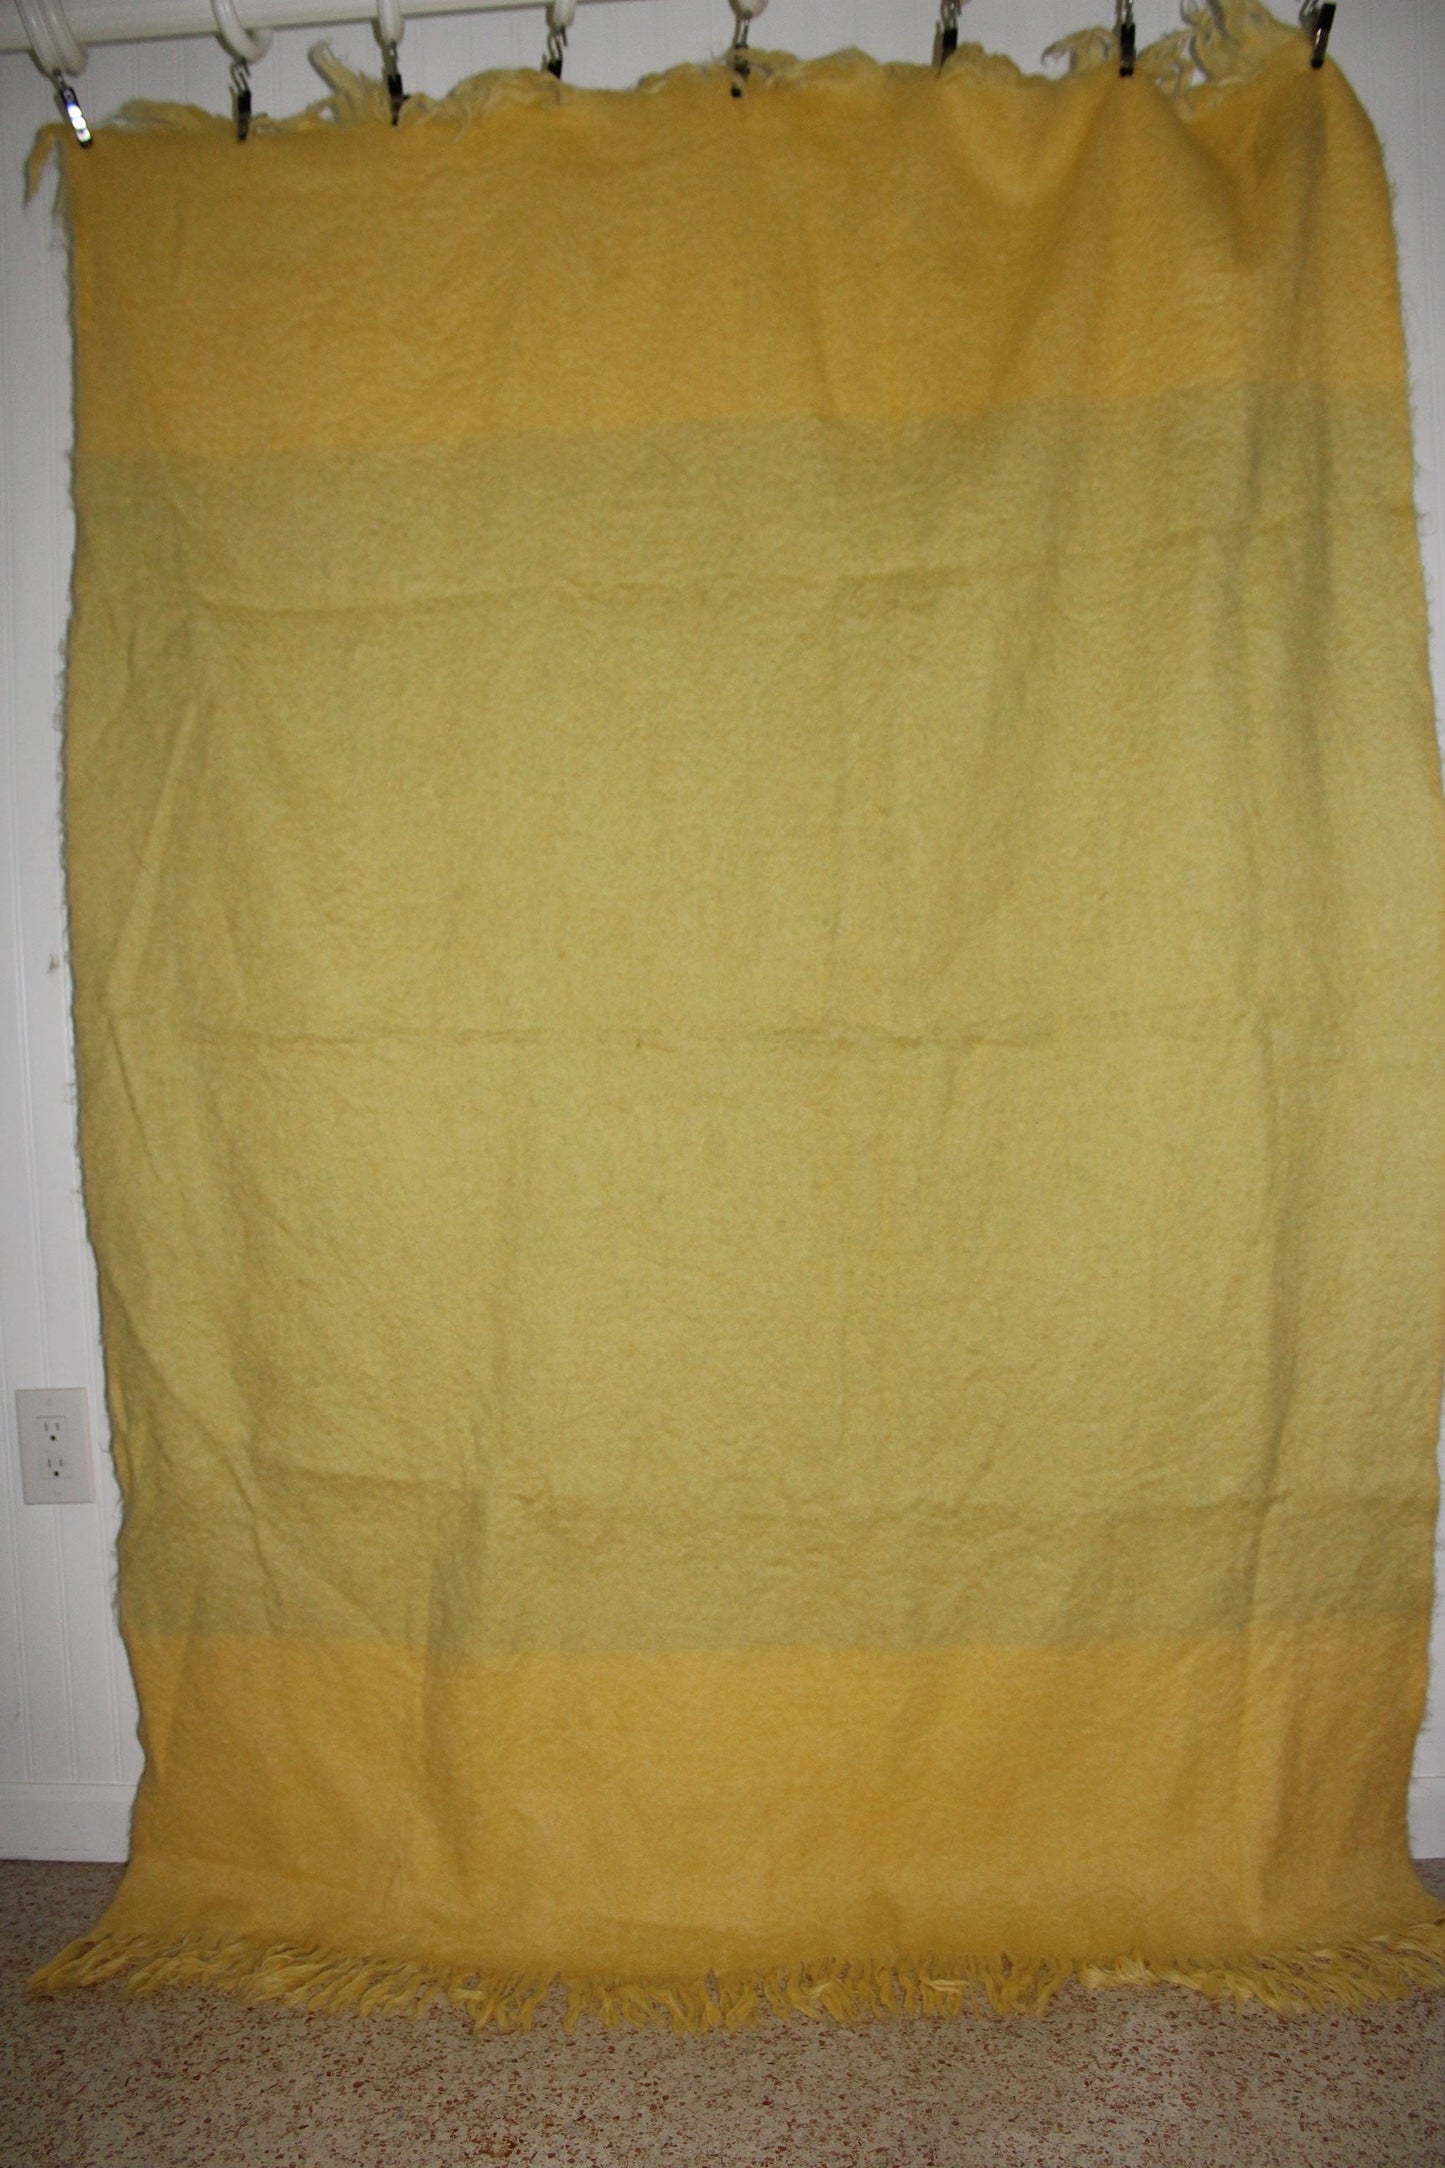 ADORATEX Mohair Blend Fringed Throw Muted Yellow Pale Green 52" X 70"